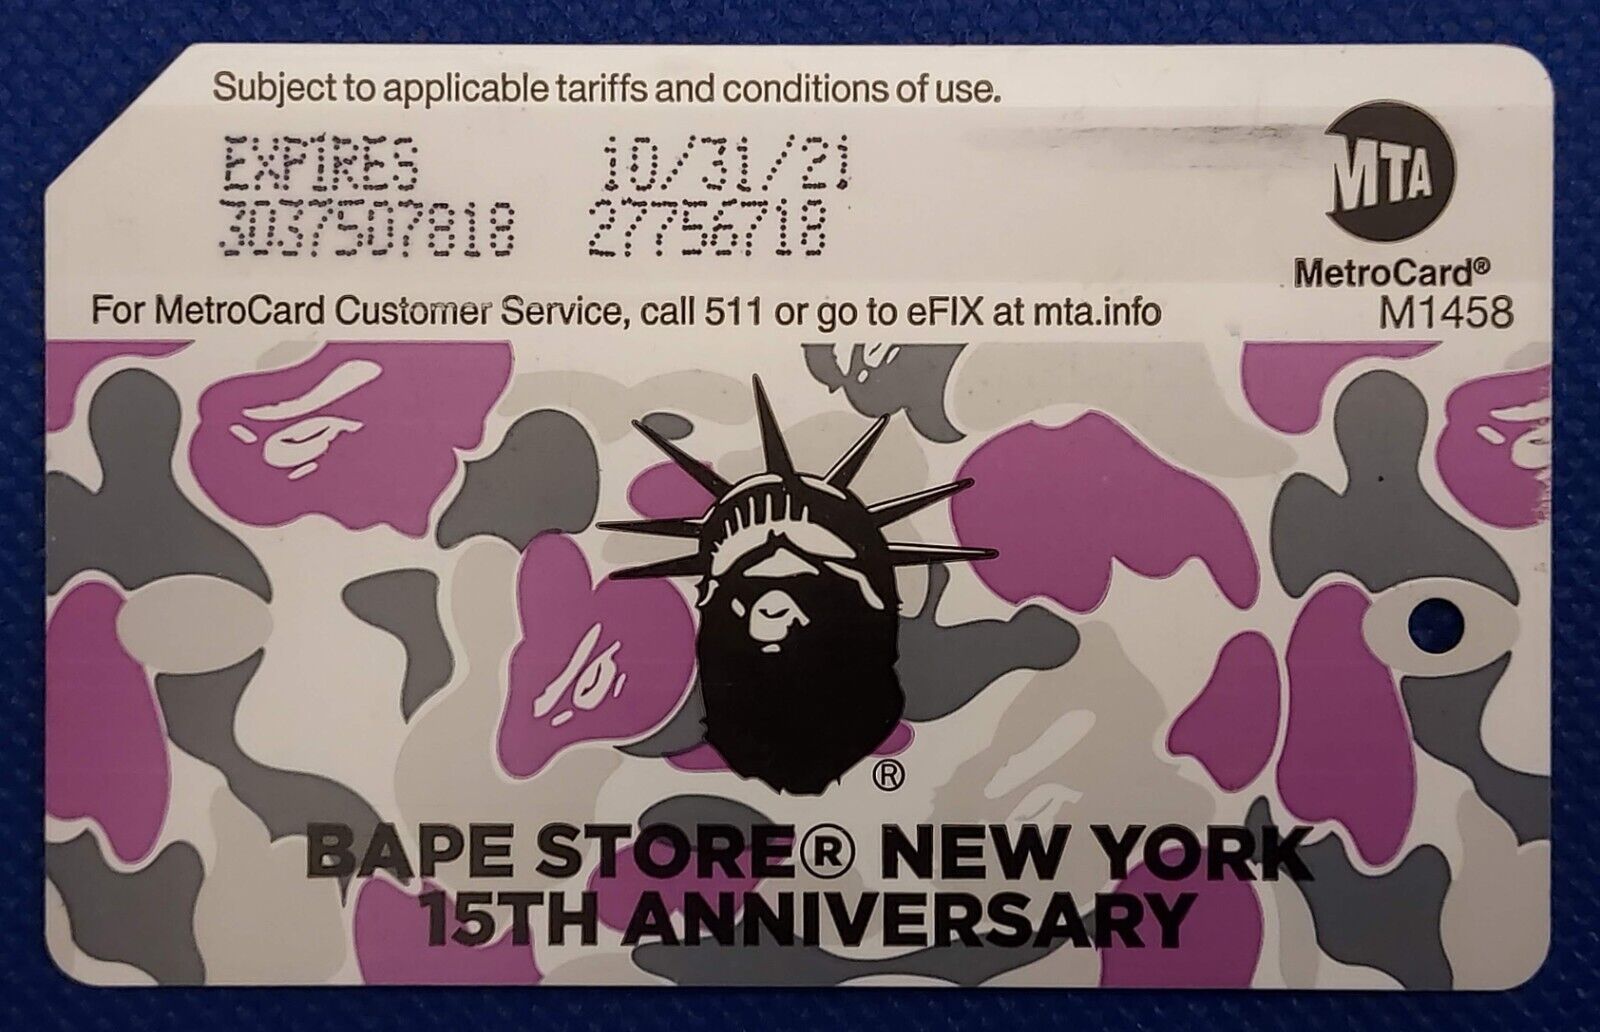 Collectible expired NYC MetroCard - BAPE Store